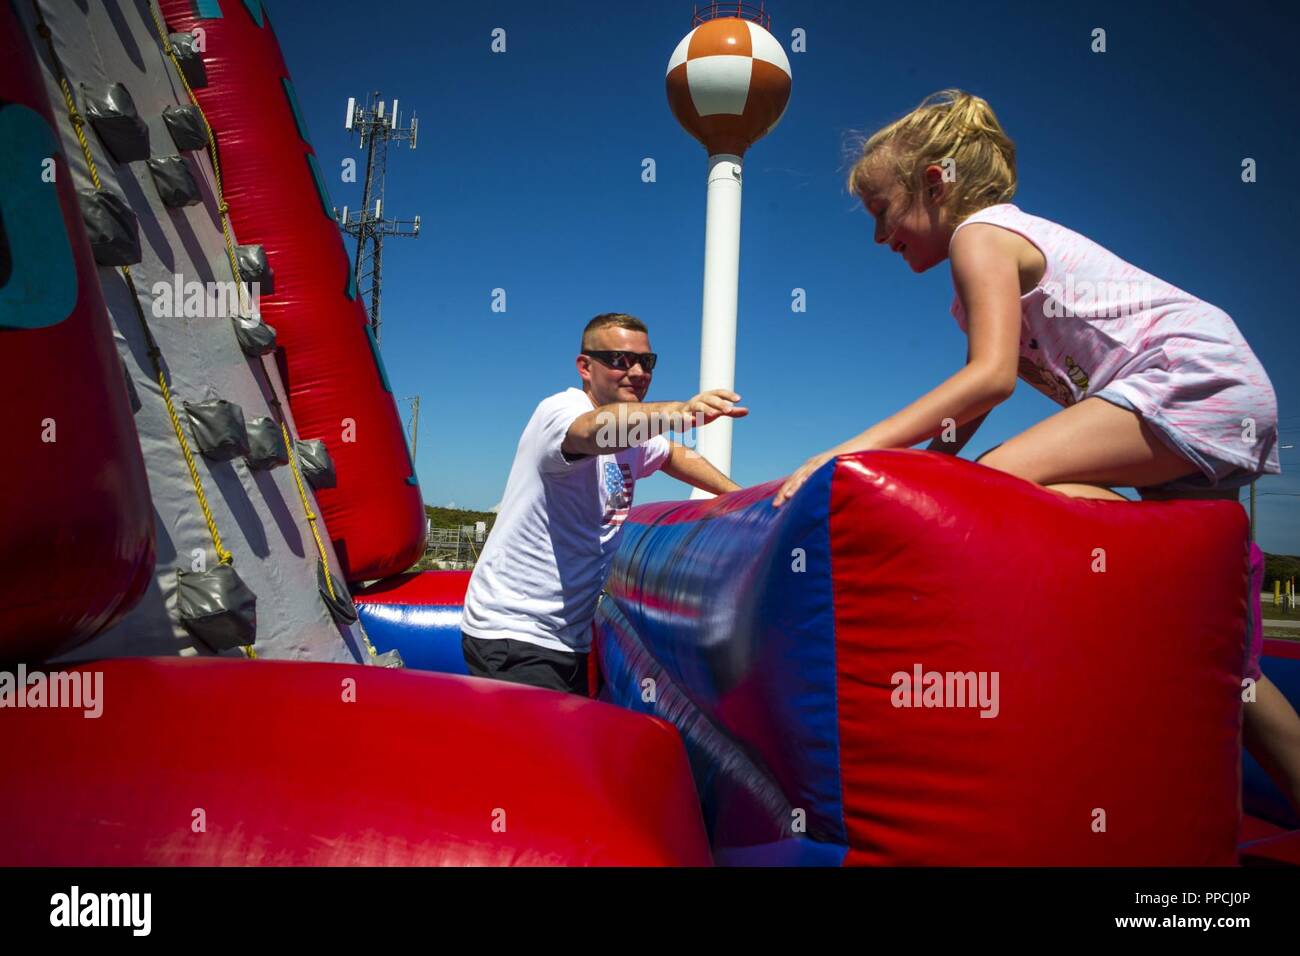 CAMP LEJEUNE, N.C. (August 29, 2018) U.S. Marine Corps Gunnery Sgt. Brian Price, an administrative chief  assigned to the 26th Marine Expeditionary Unit (MEU) plays with his daughter, Haley, during a family fun-day at Onslow Beach, N.C., August 29, 2018. The Marines, Sailors and family members attended the event to celebrate the return of the unit from a recent deployment at sea. Stock Photo